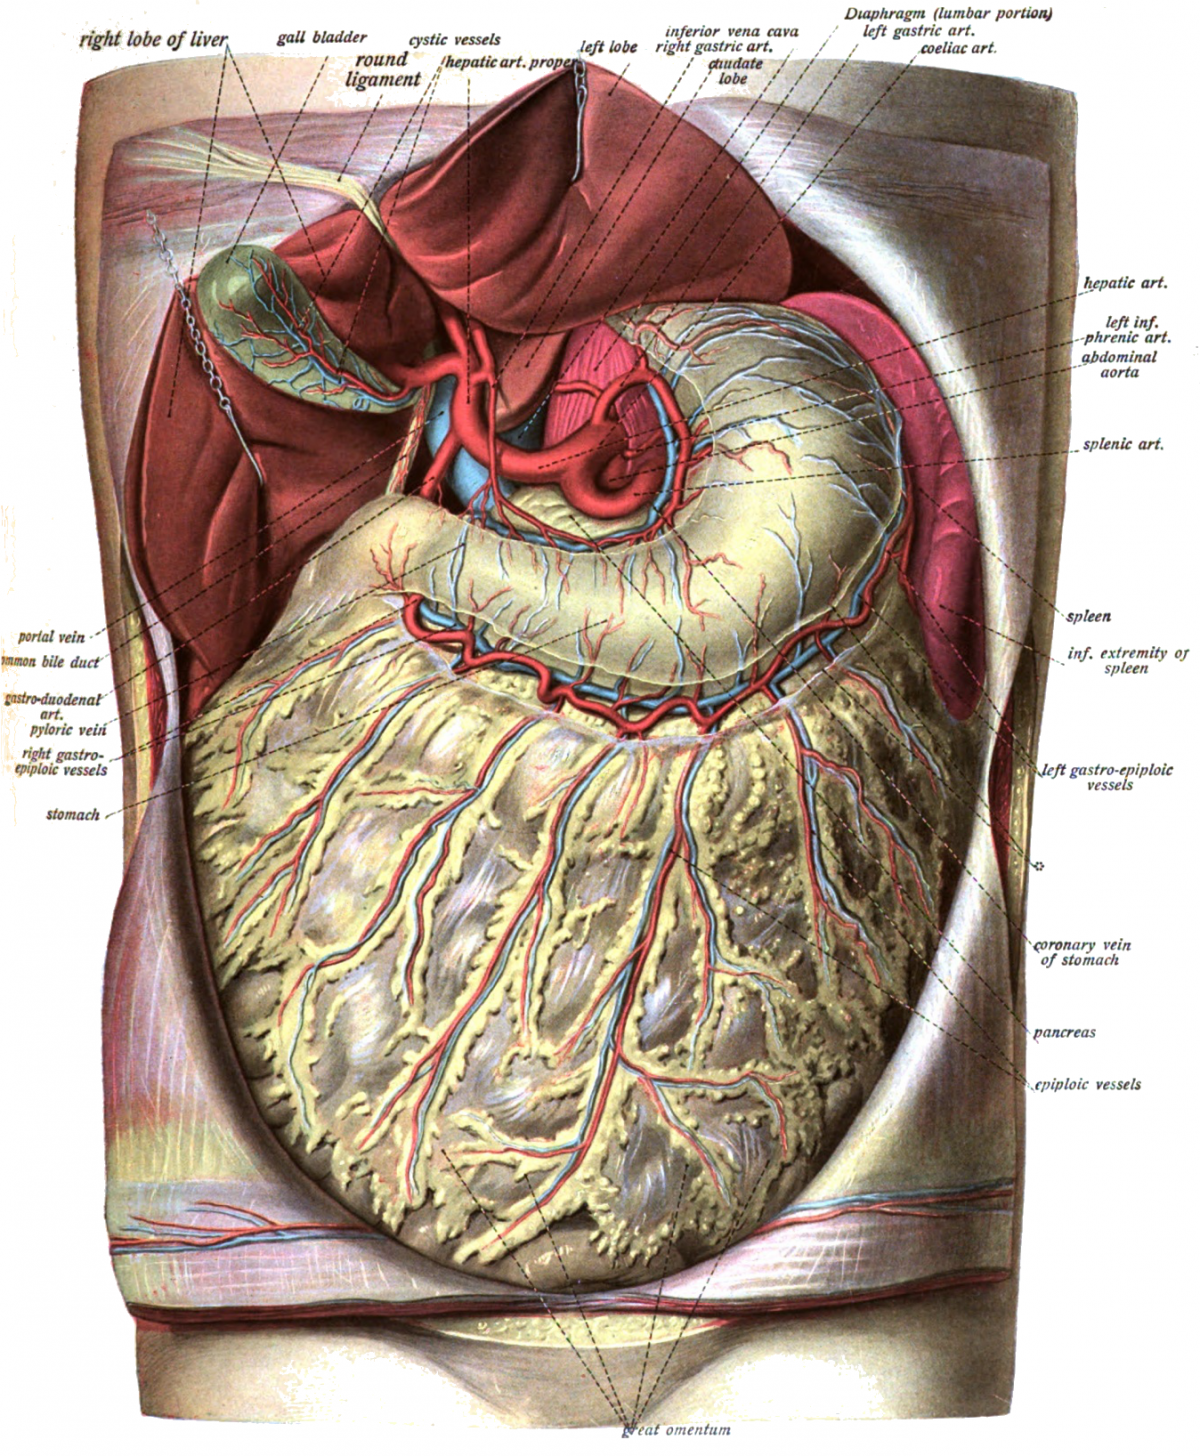 The Omentum: A Curtain of Tissue That Keeps Our Guts Working